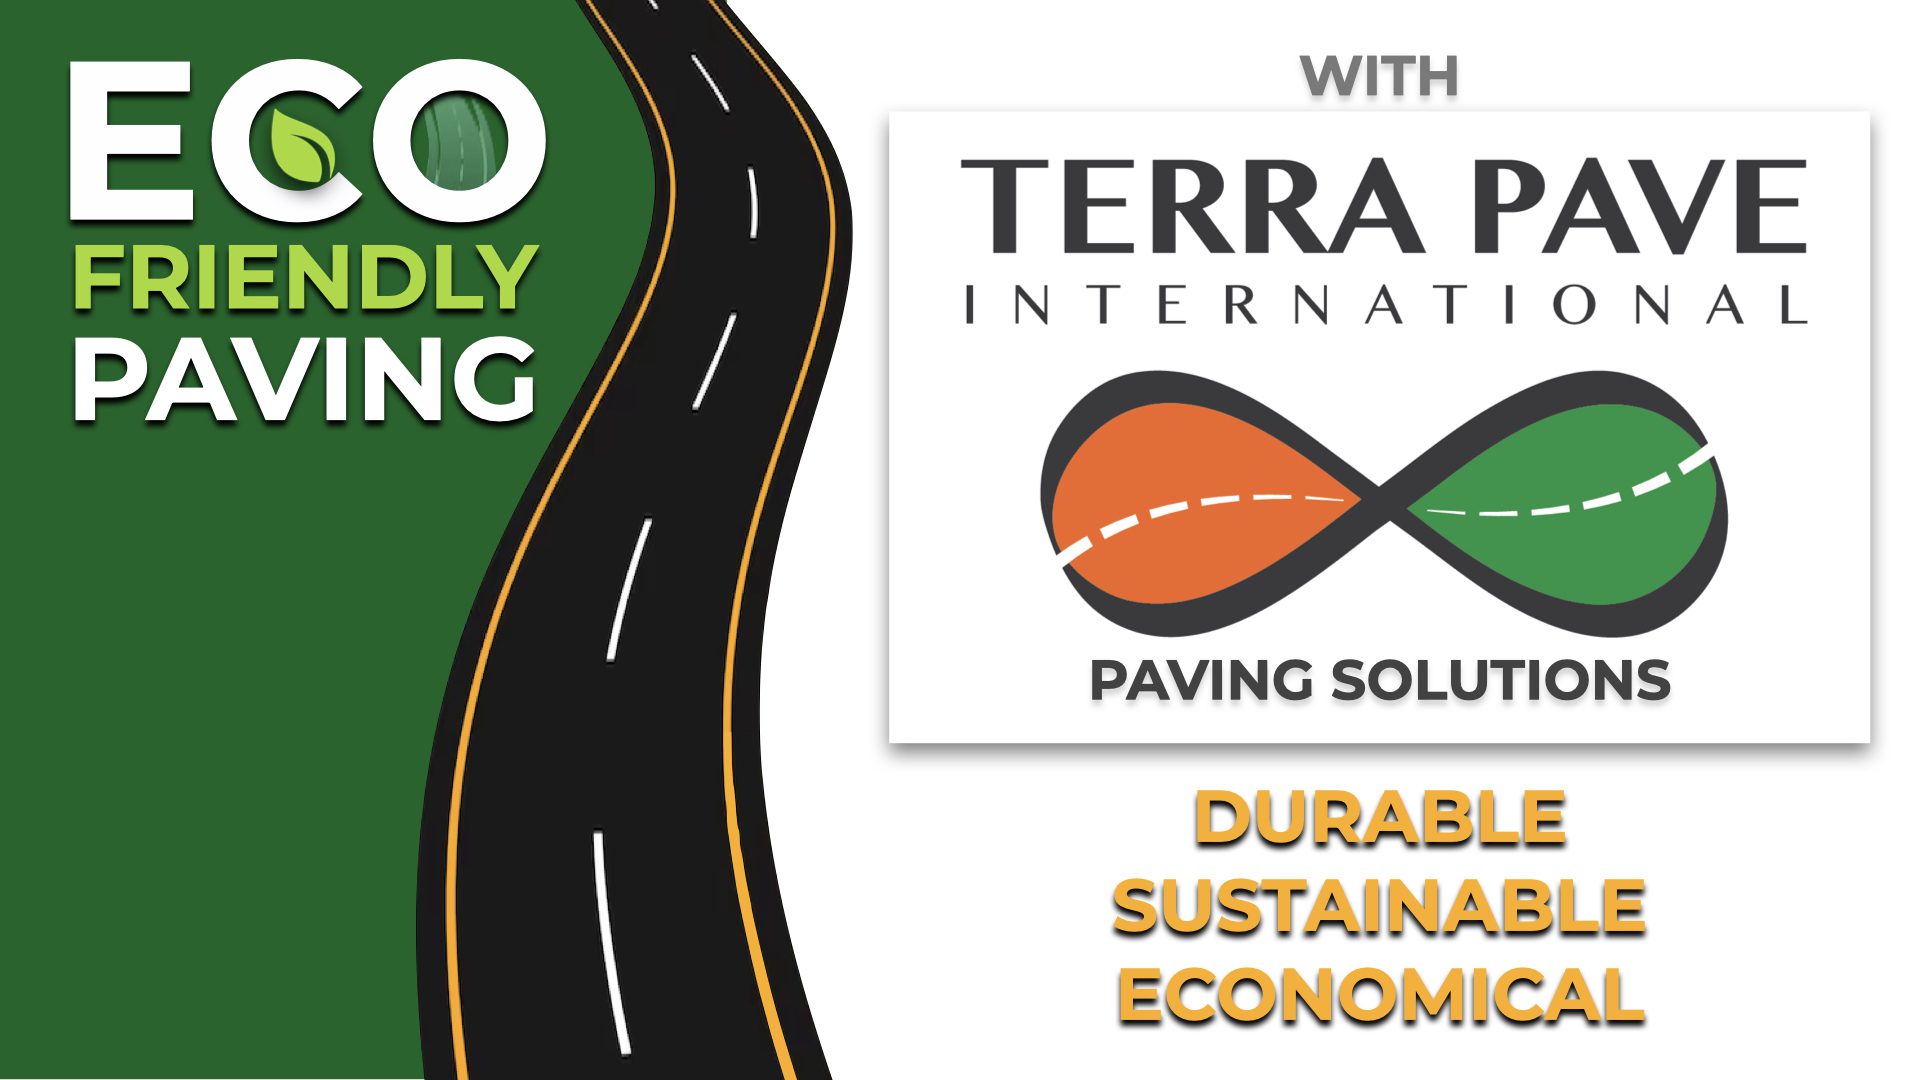 Eco Friendly Paving with Terra Pave International